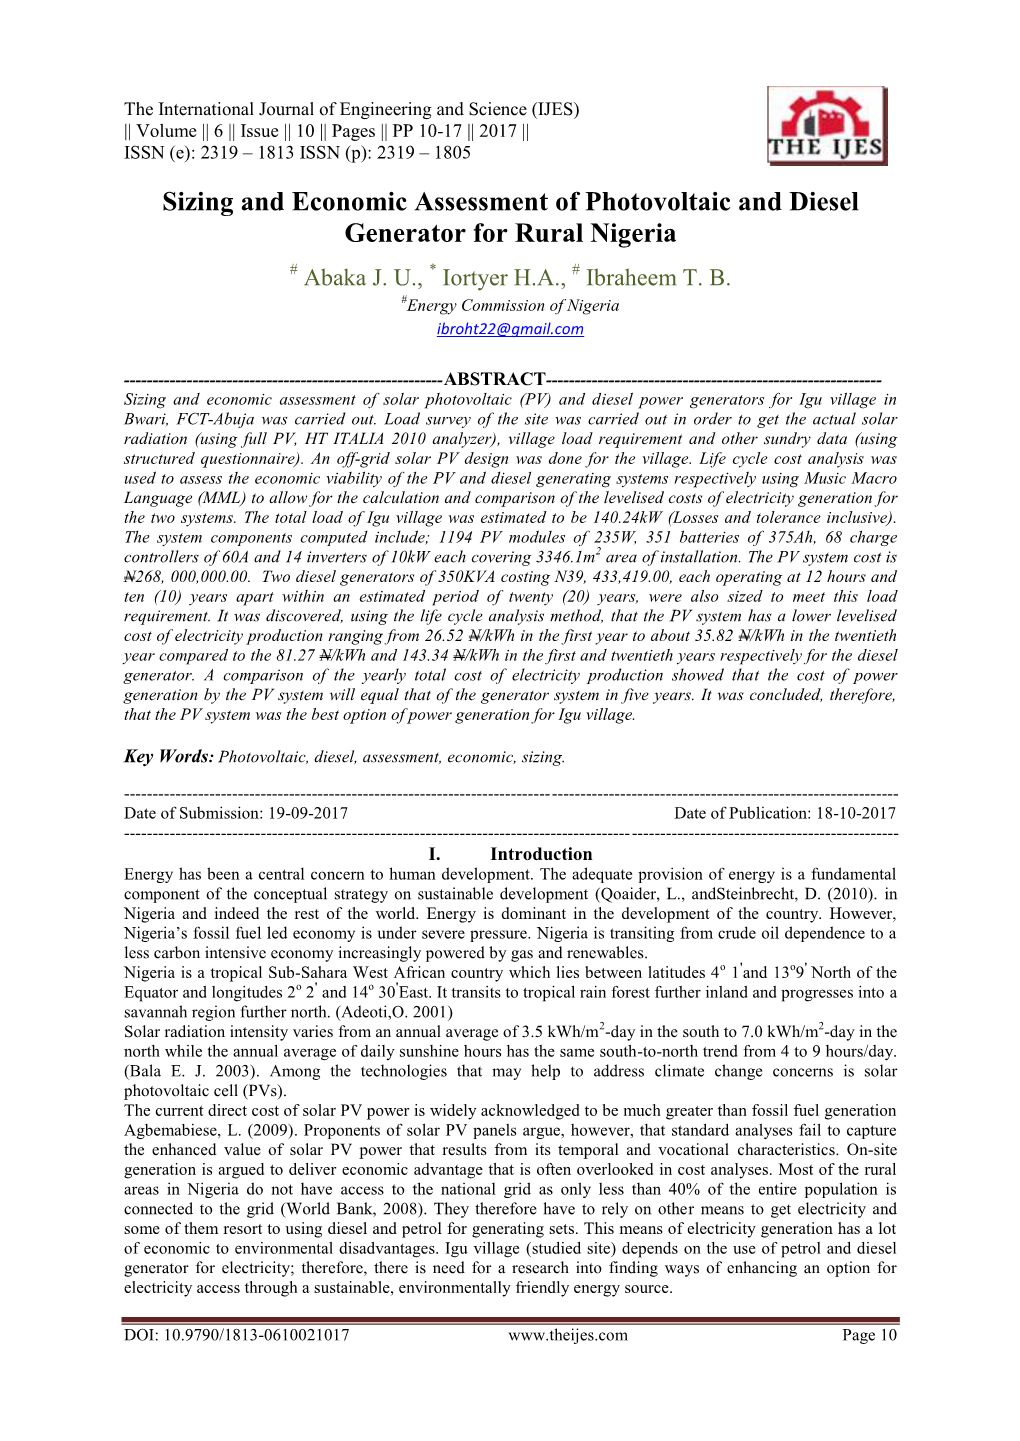 Sizing and Economic Assessment of Photovoltaic and Diesel Generator for Rural Nigeria